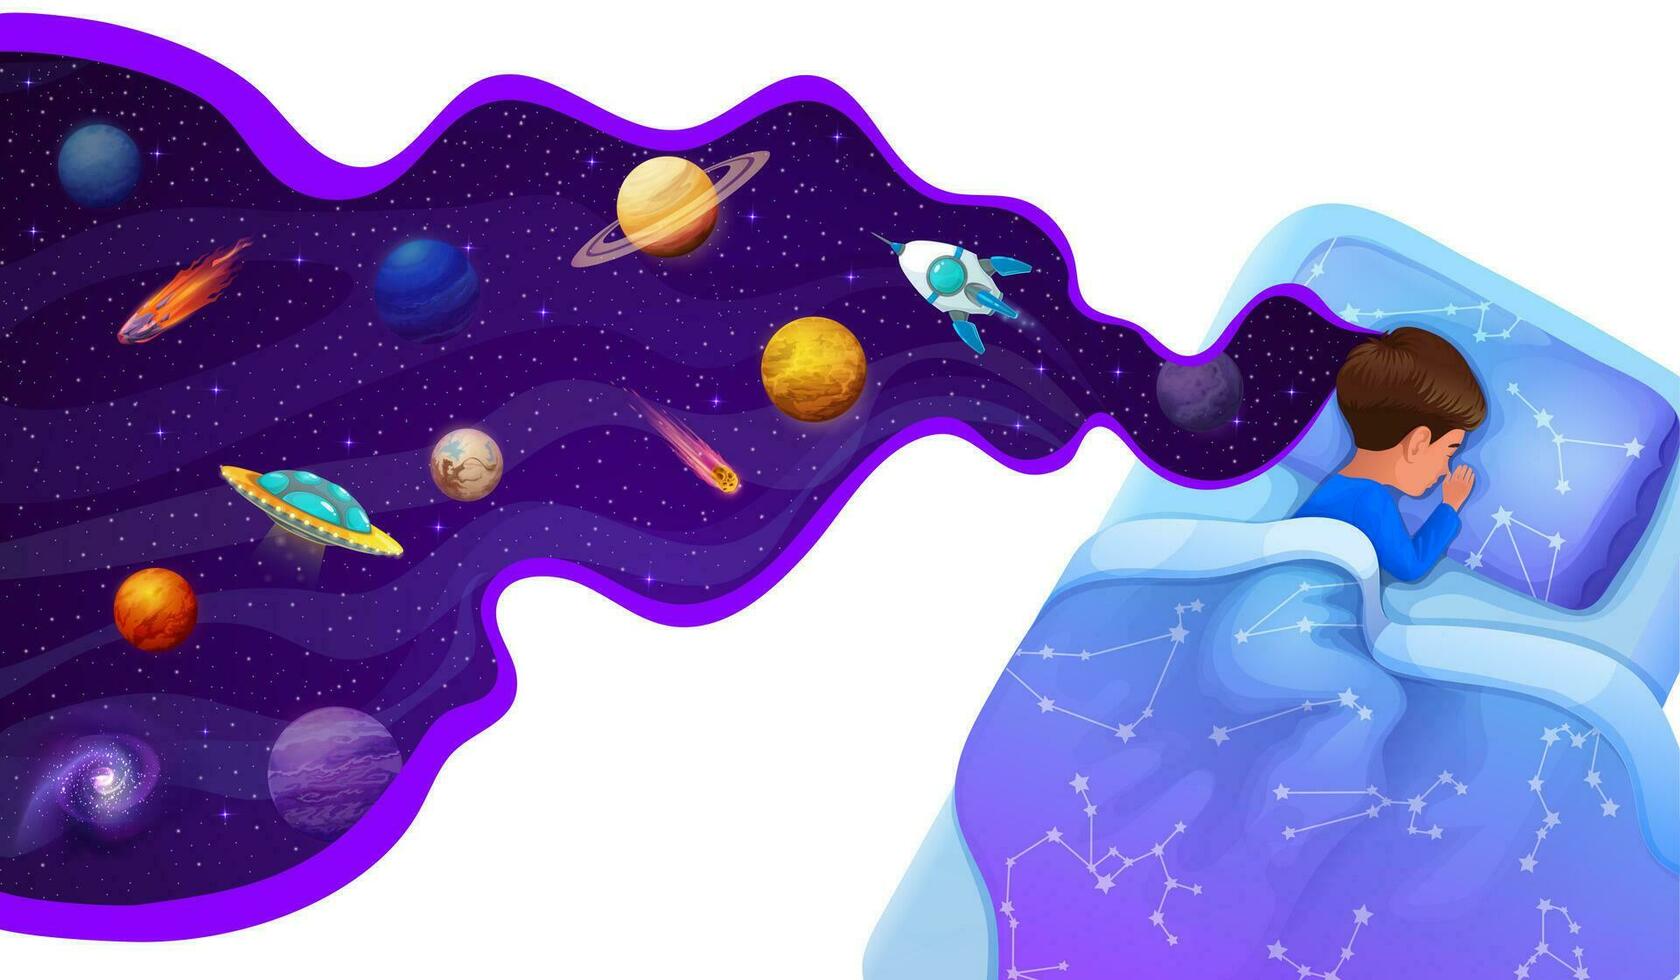 Sleeping kid in bed and galaxy space planets dream vector